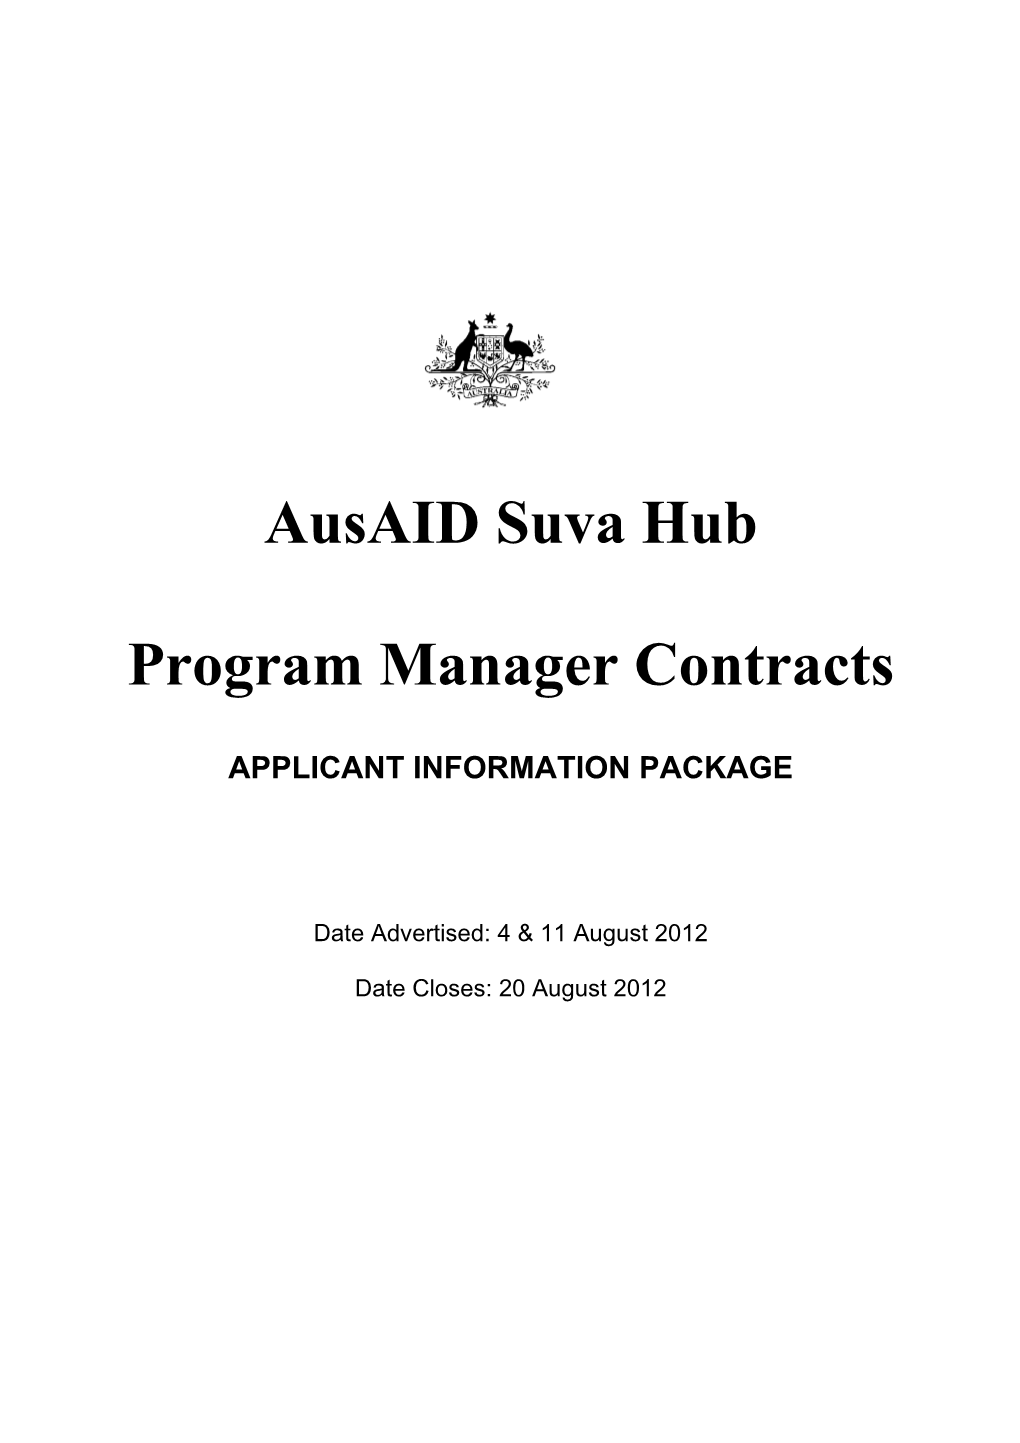 Program Manager Contracts